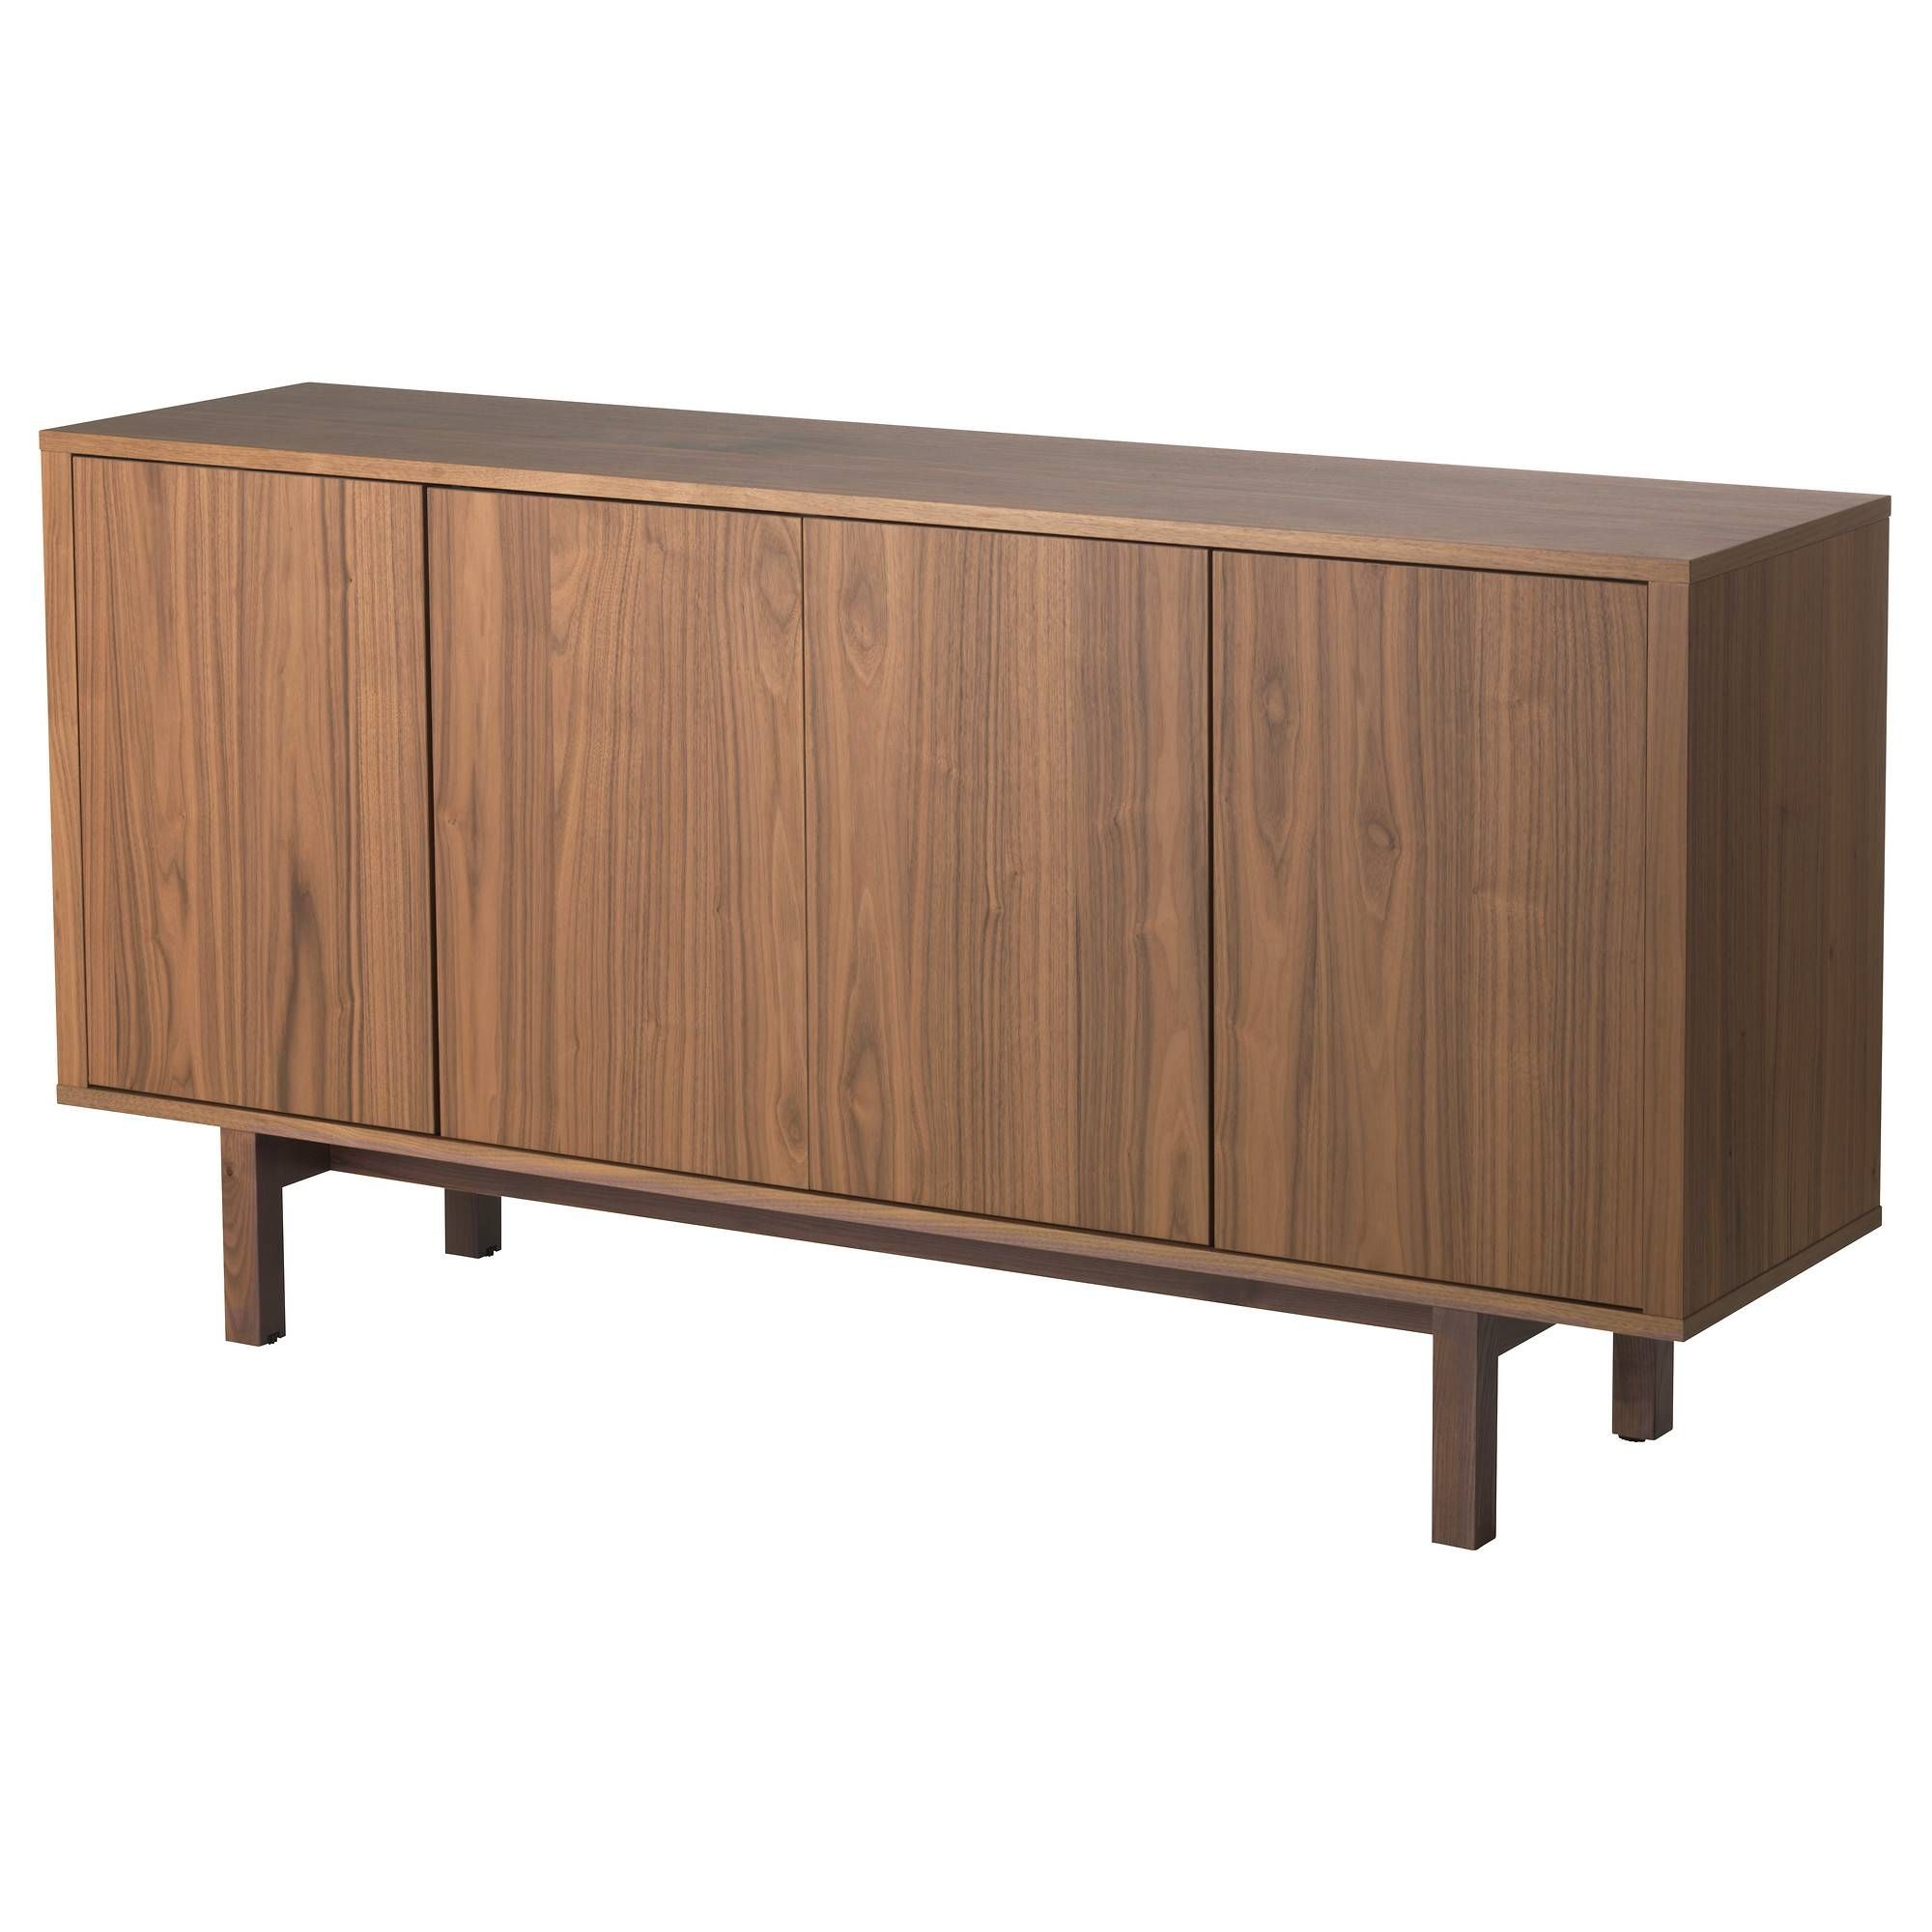 Stockholm Sideboard – Ikea With Regard To Most Recently Released Hallway Sideboards (View 7 of 15)